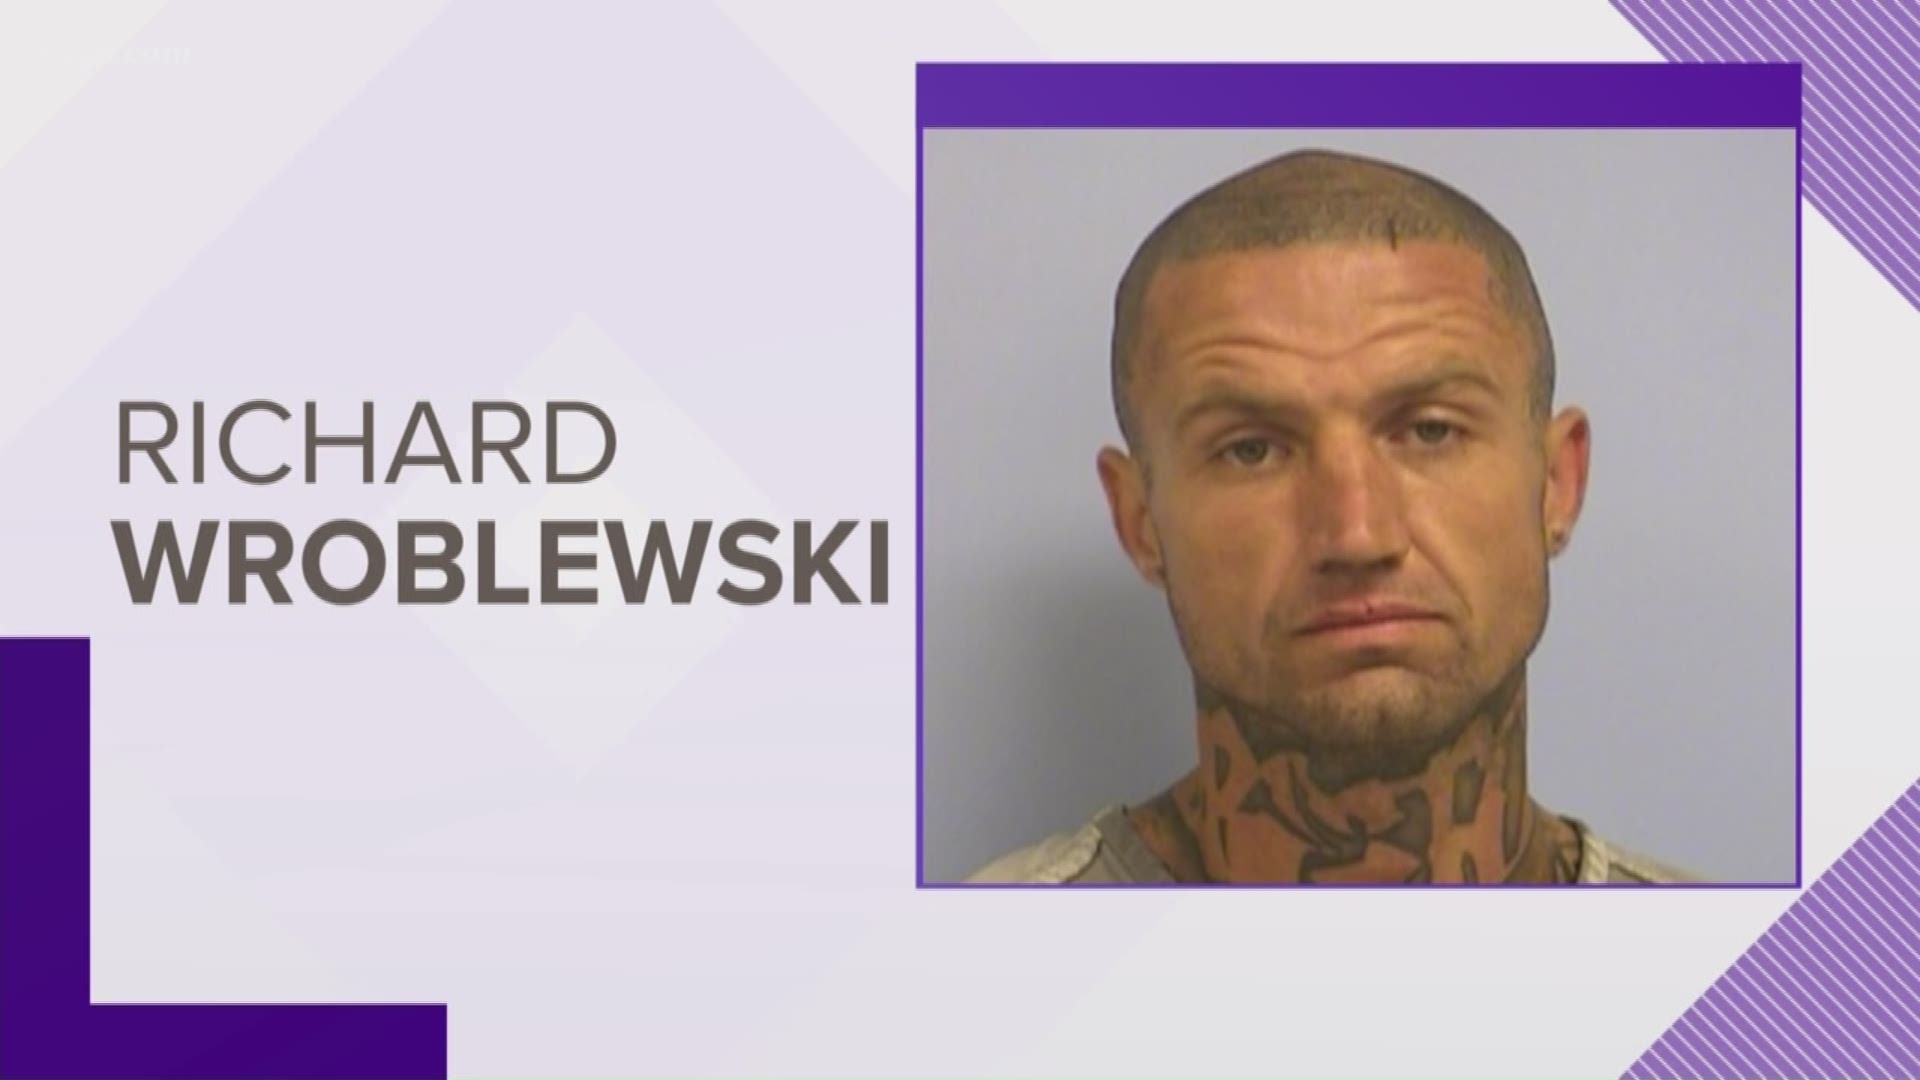 Richard Wroblewski is charged with killing a man whose body was found burned at a homeless camp.